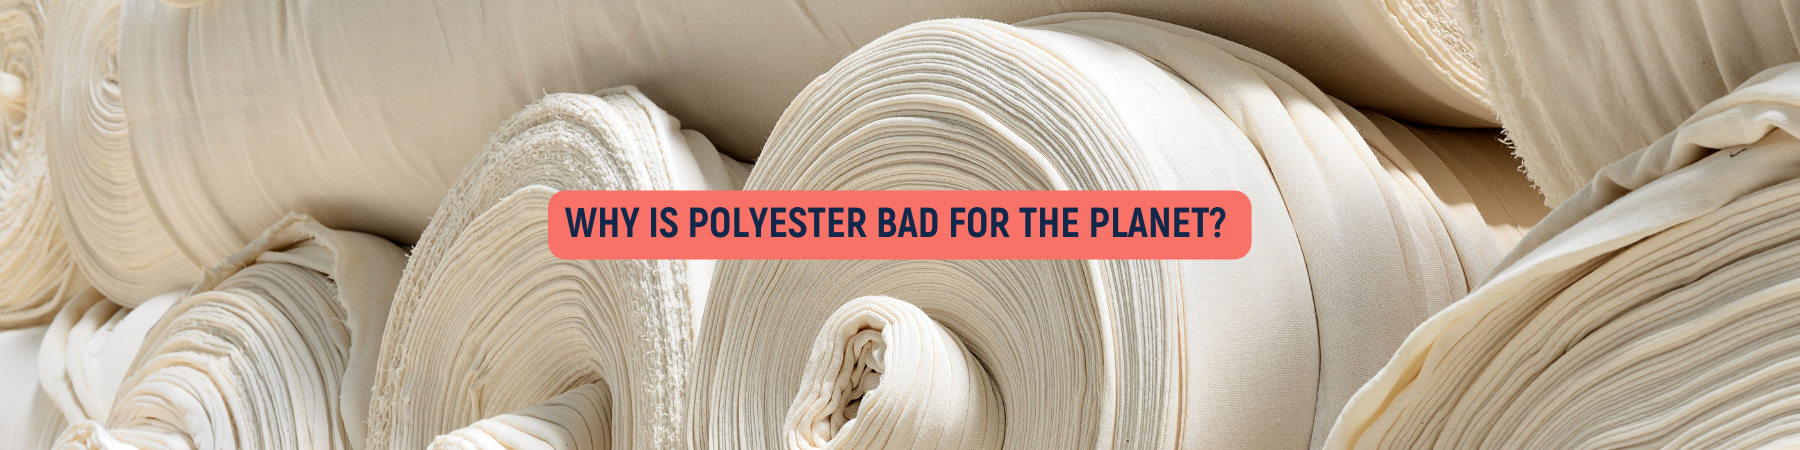 Negative environmental impacts of polyester